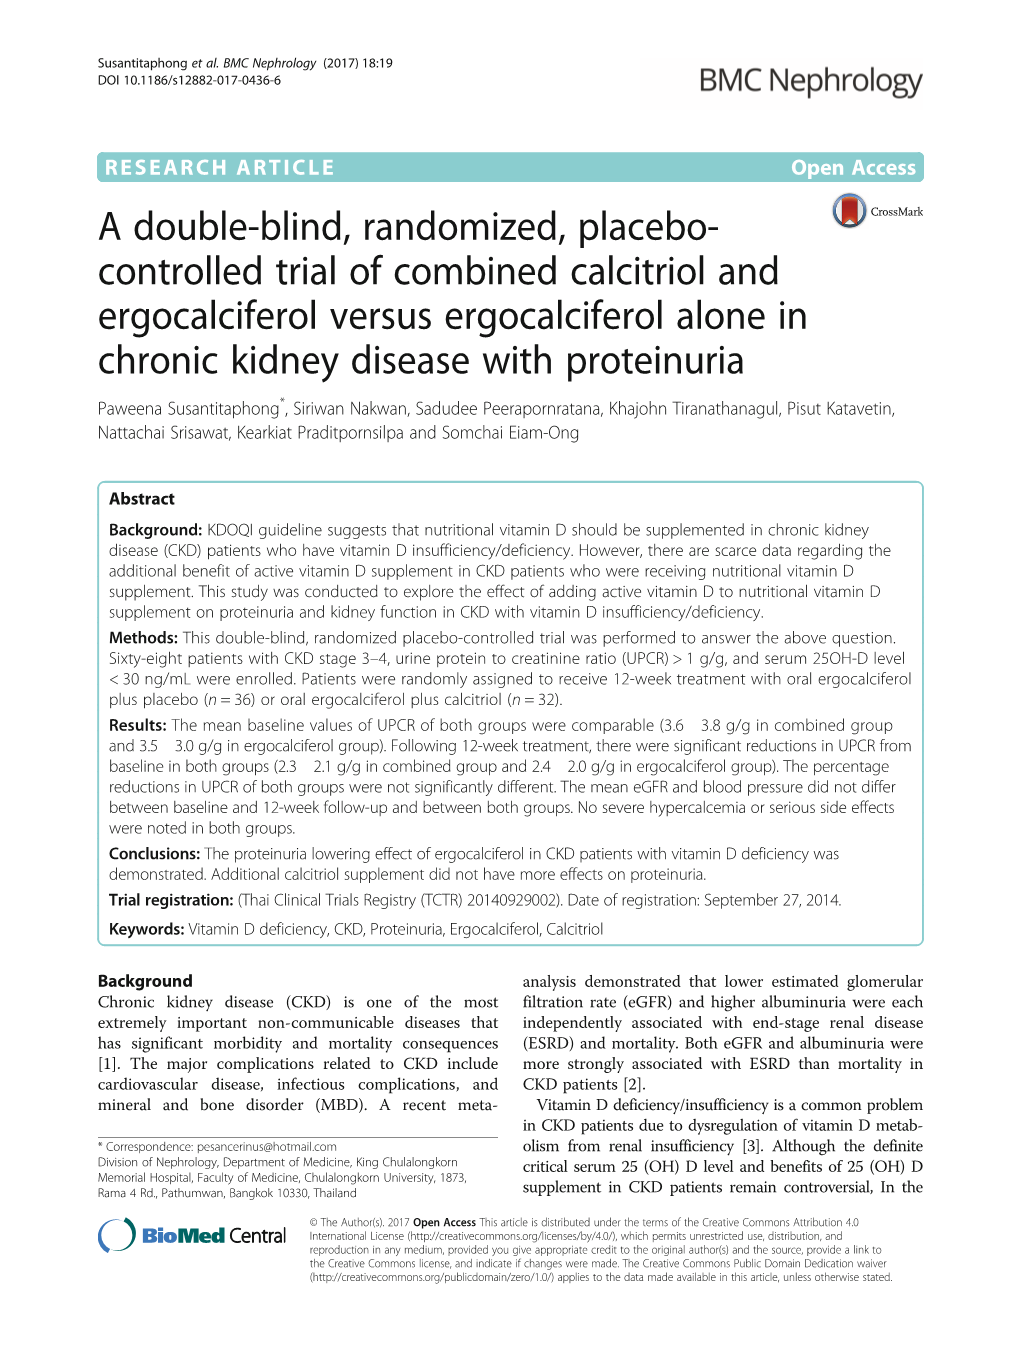 A Double-Blind, Randomized, Placebo-Controlled Trial of Combined